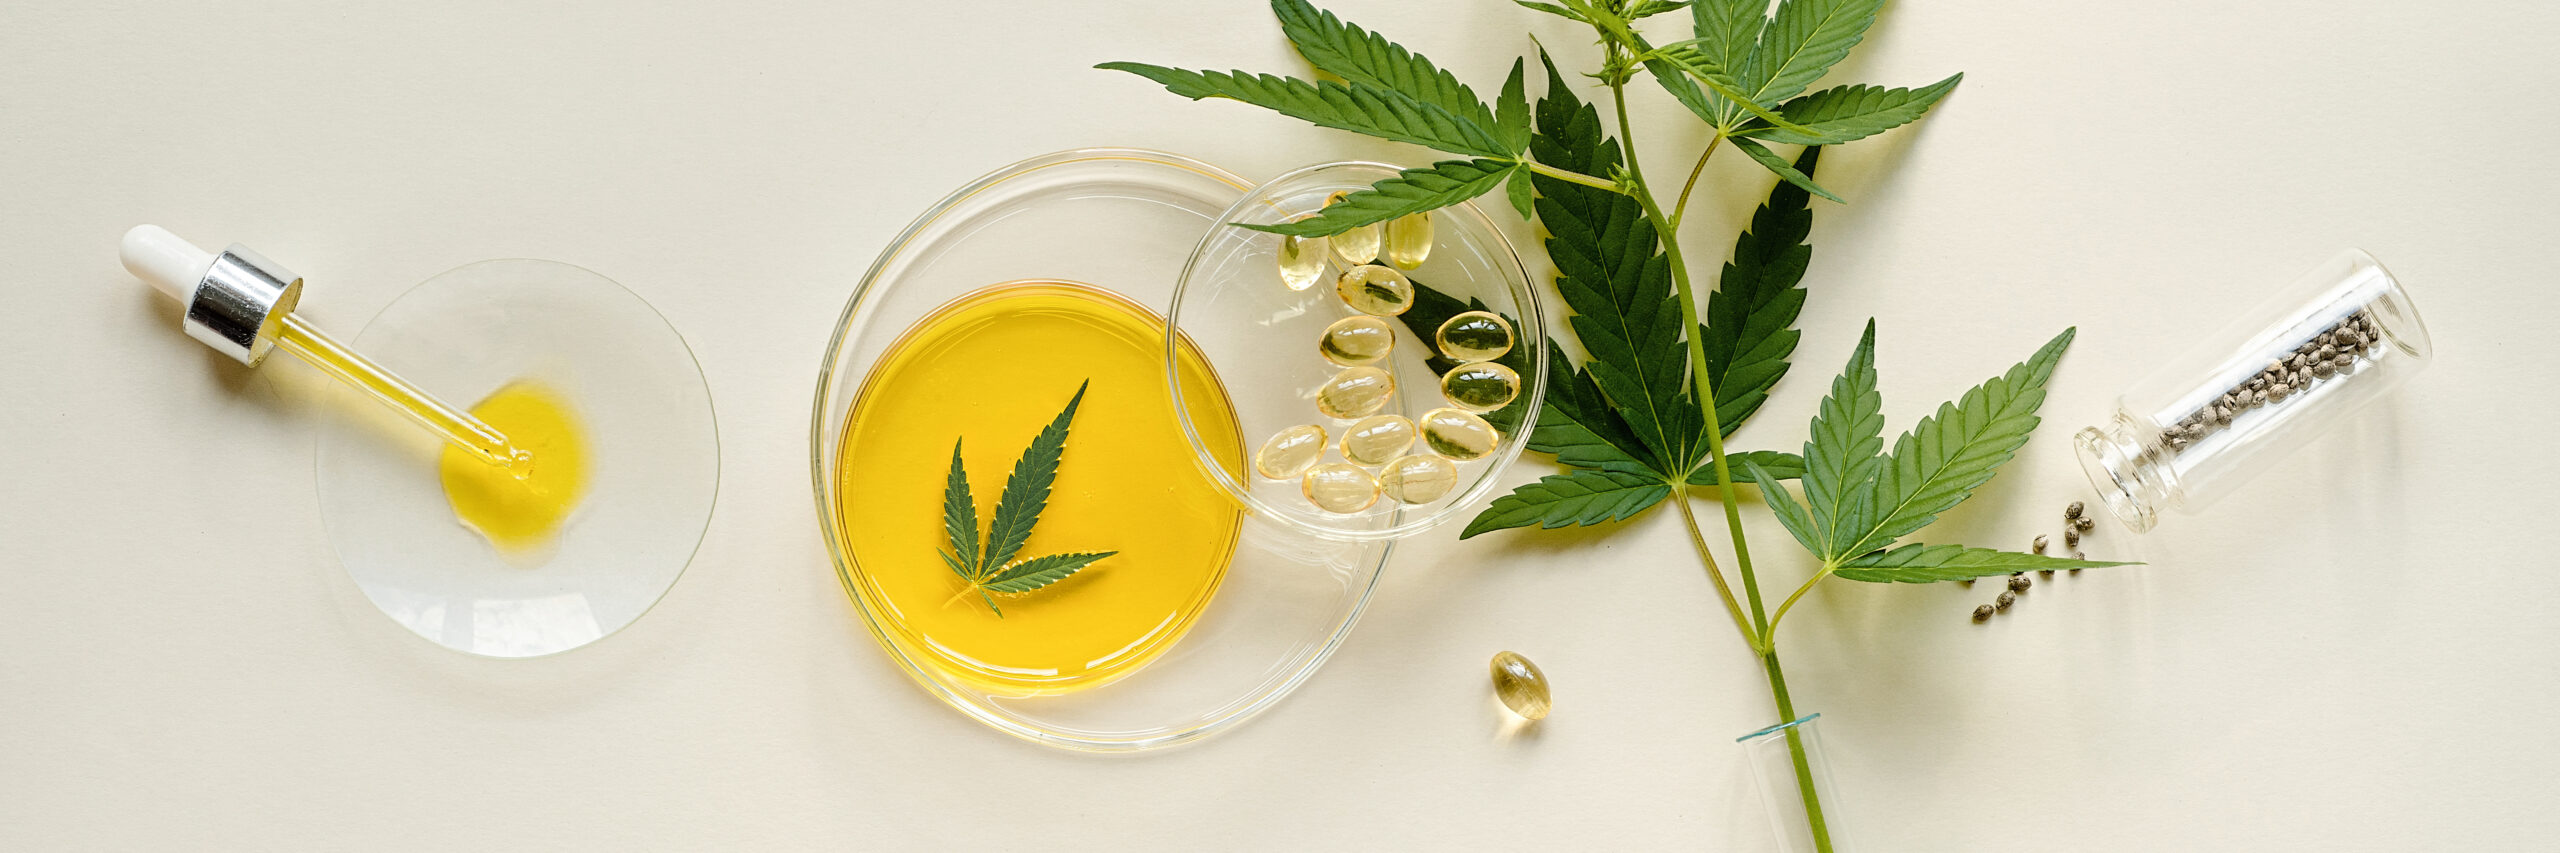 Live Resin vs. Distillate – What Are The Differences & Similarities?